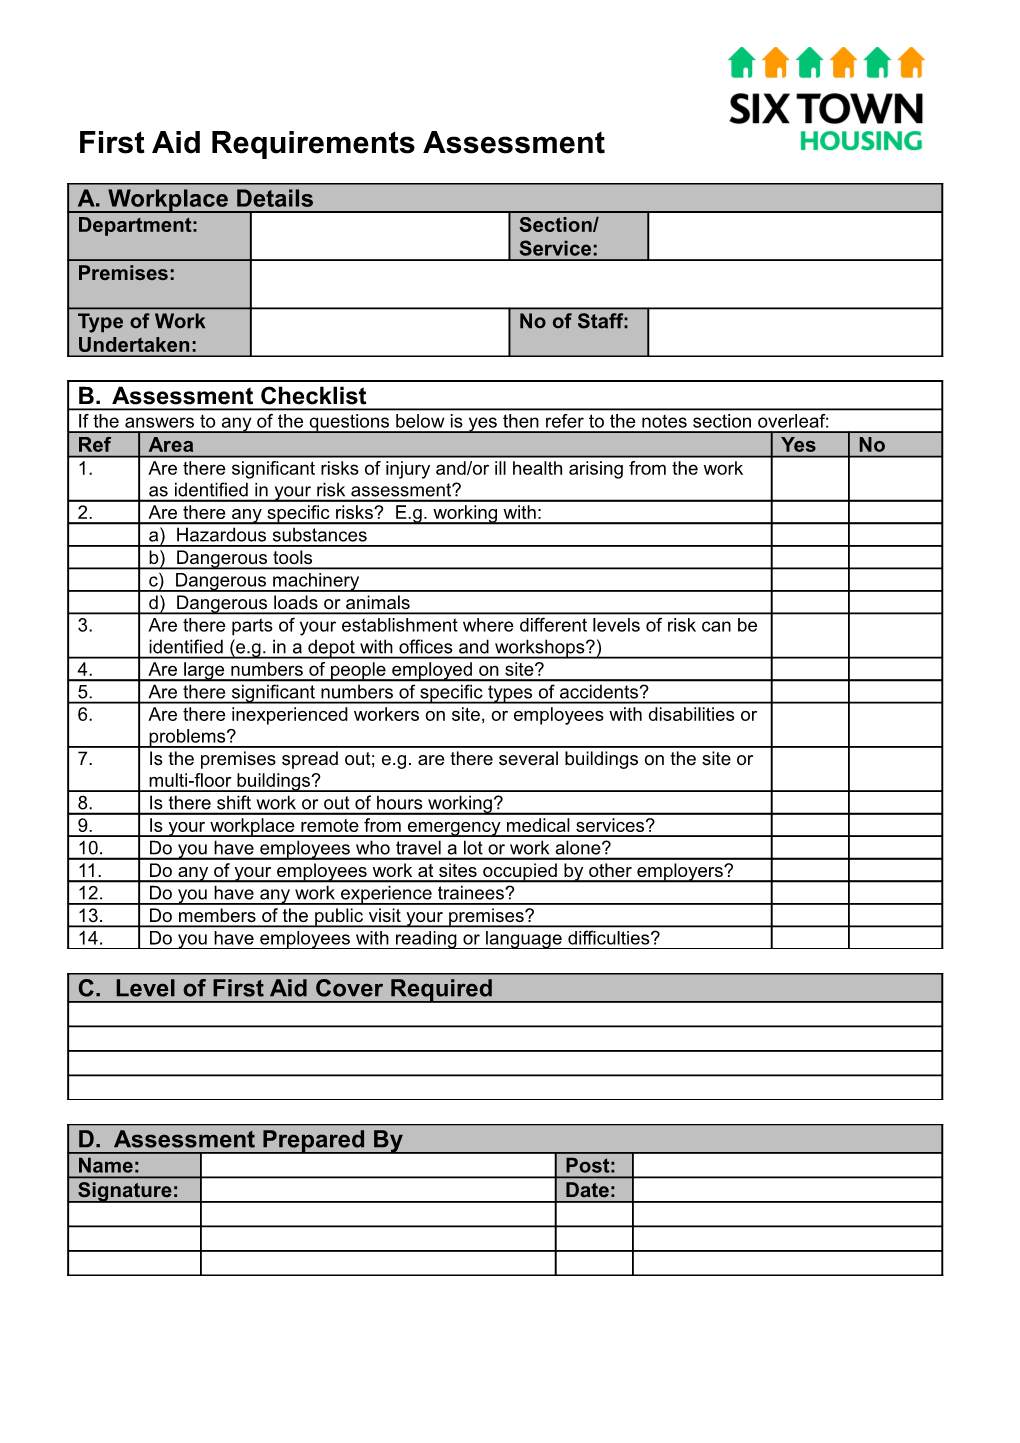 First Aid Requirements Assessment